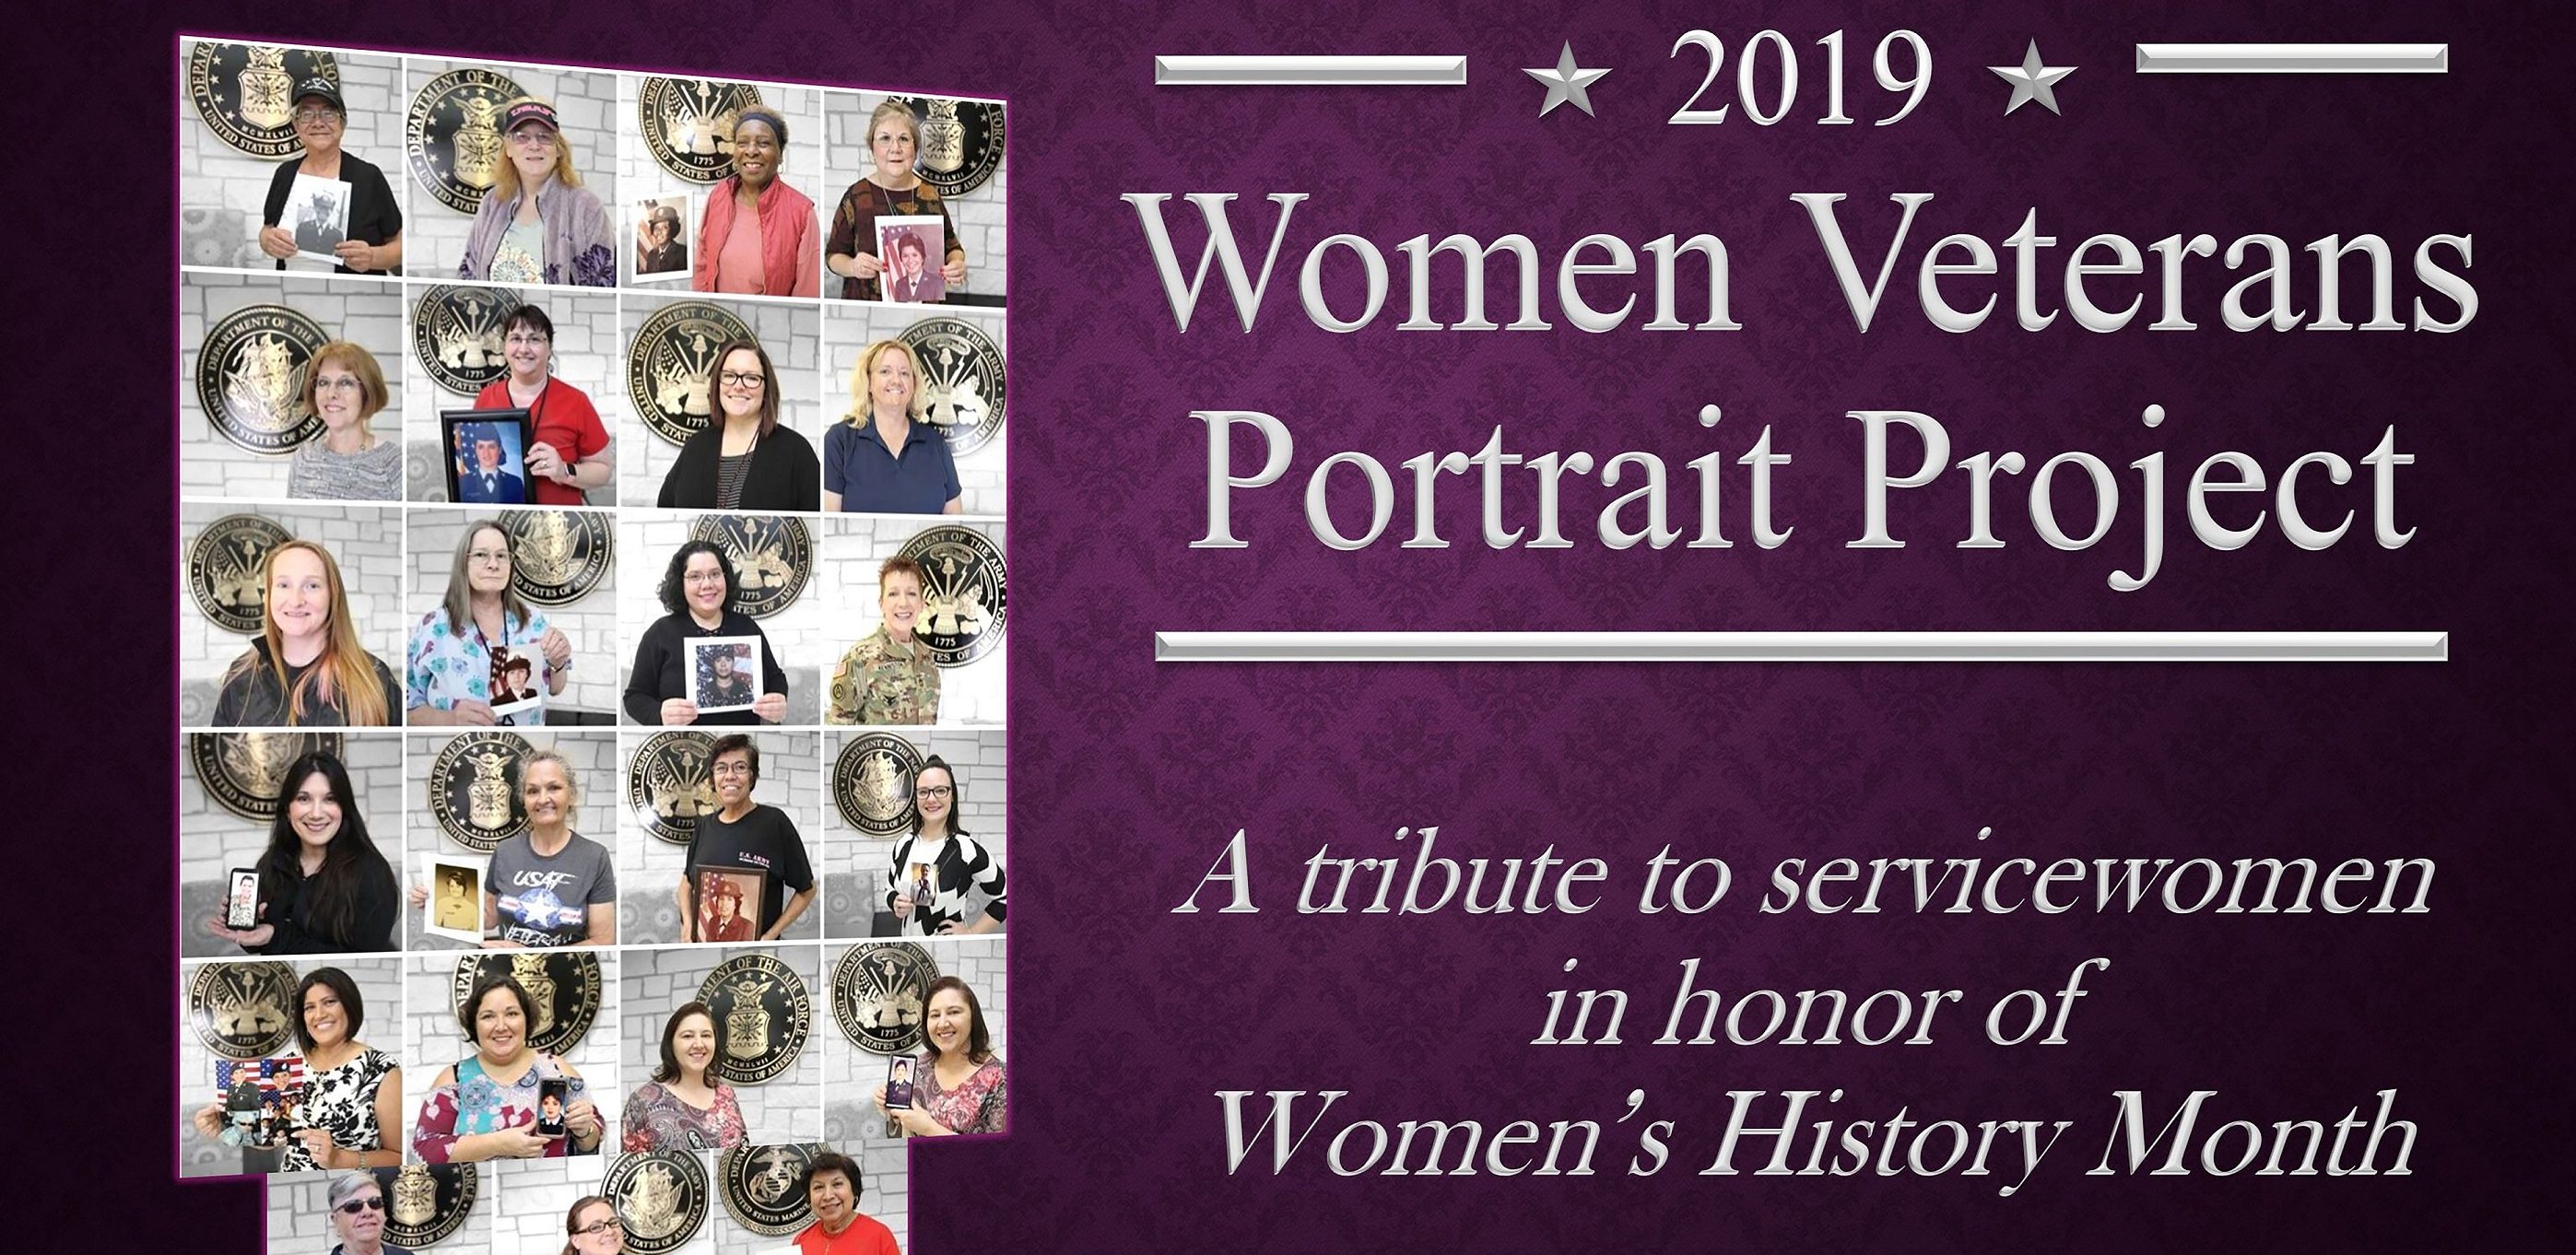 Twenty-two Women Veterans from the Corpus Christi area participated in VA Texas Valley Coastal Bend Health Care System’s (VCB) 2019 Women Veteran’s Portrait Project, which is designed to recognize the service of Women Veterans from the local community during Women’s History Month, a nation-wide observance that takes place in March. (VA photo illustration by Luis H. Loza Gutierrez)